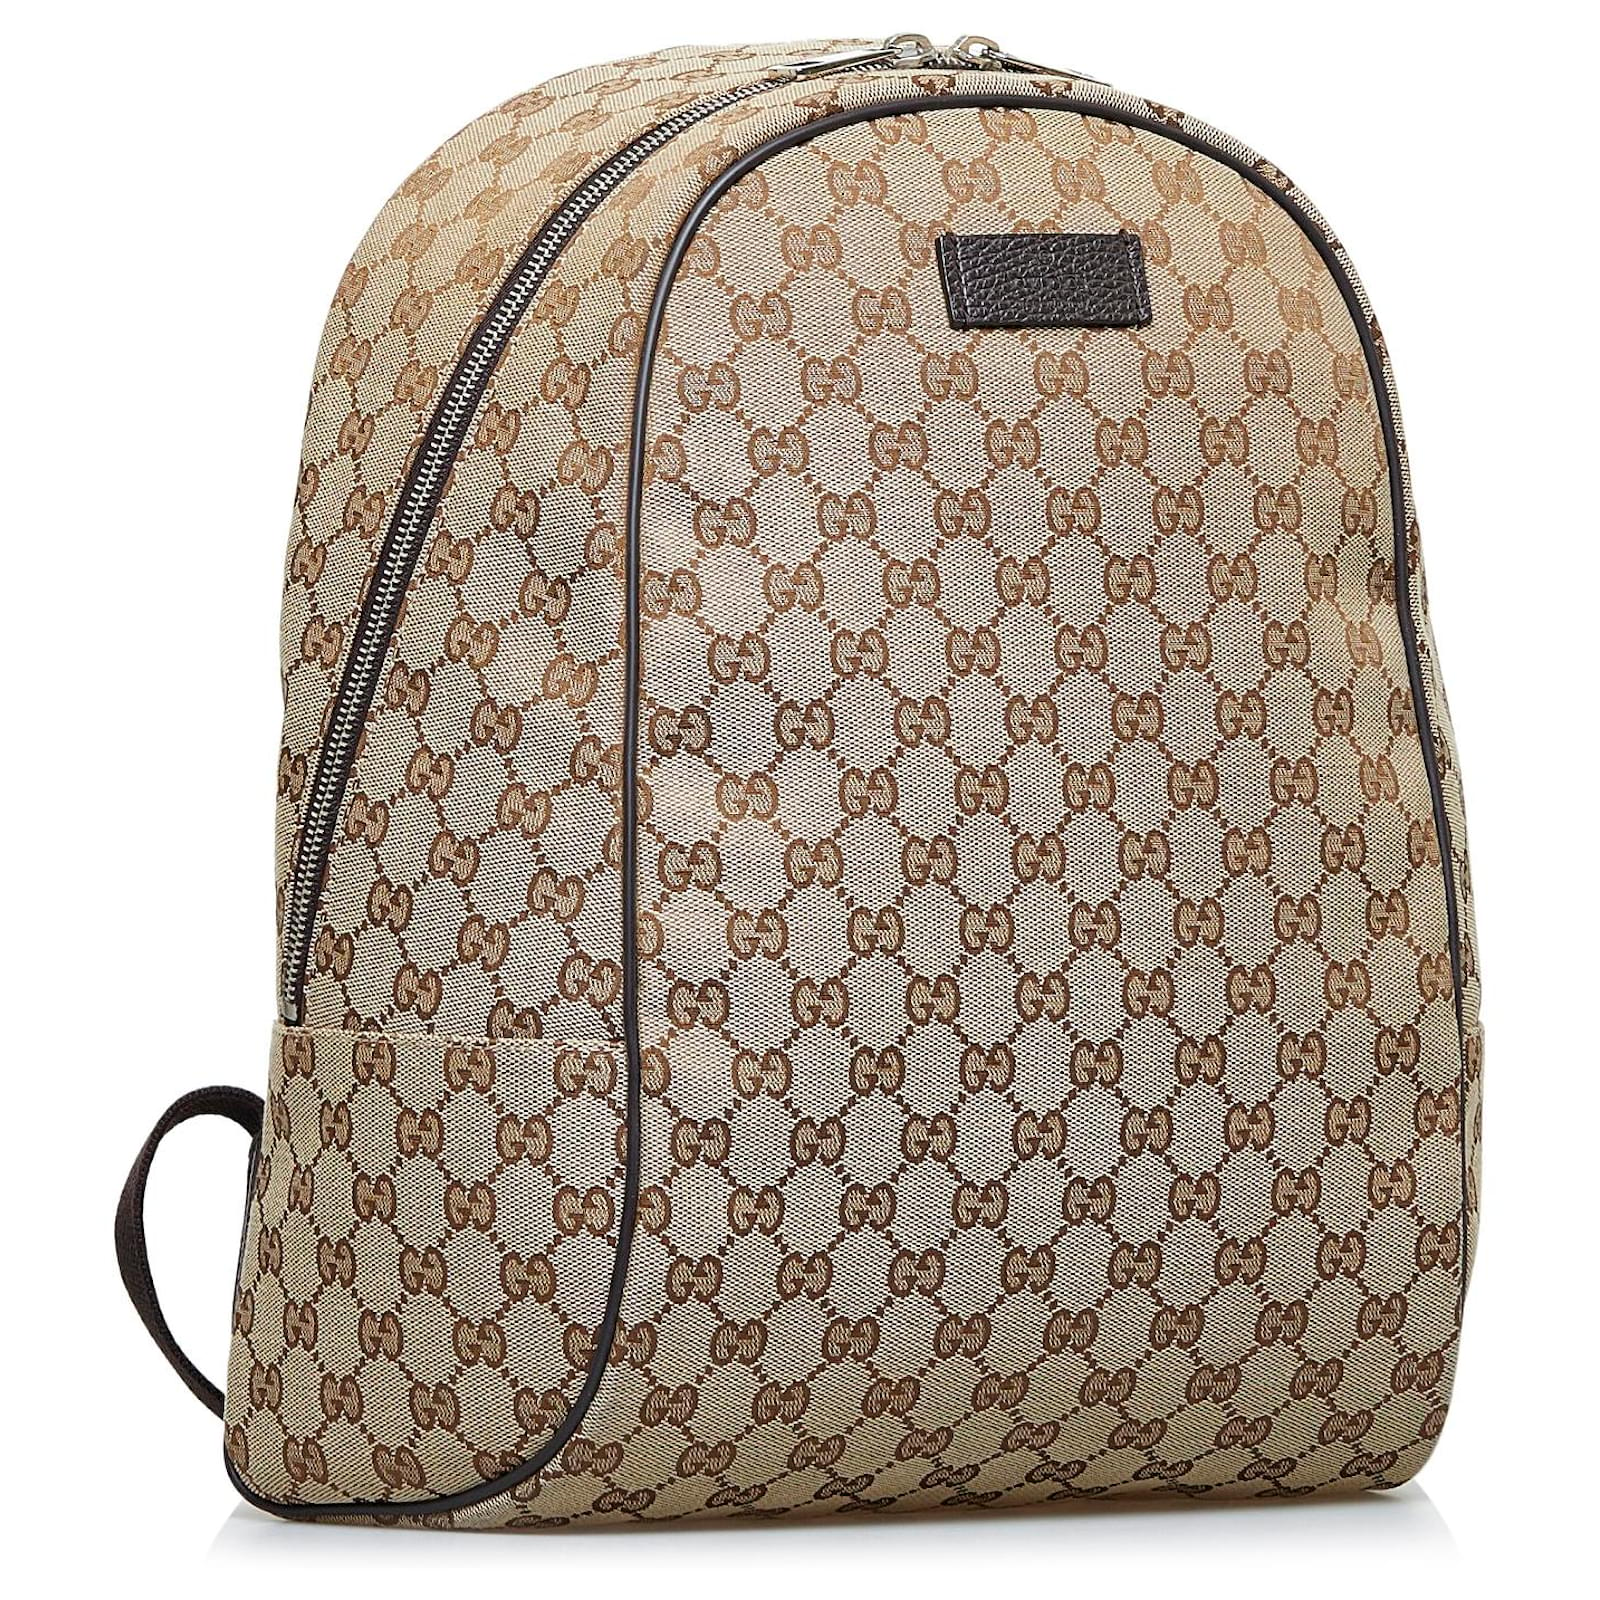 Gucci Brown Monogram Canvas Travel Backpack 